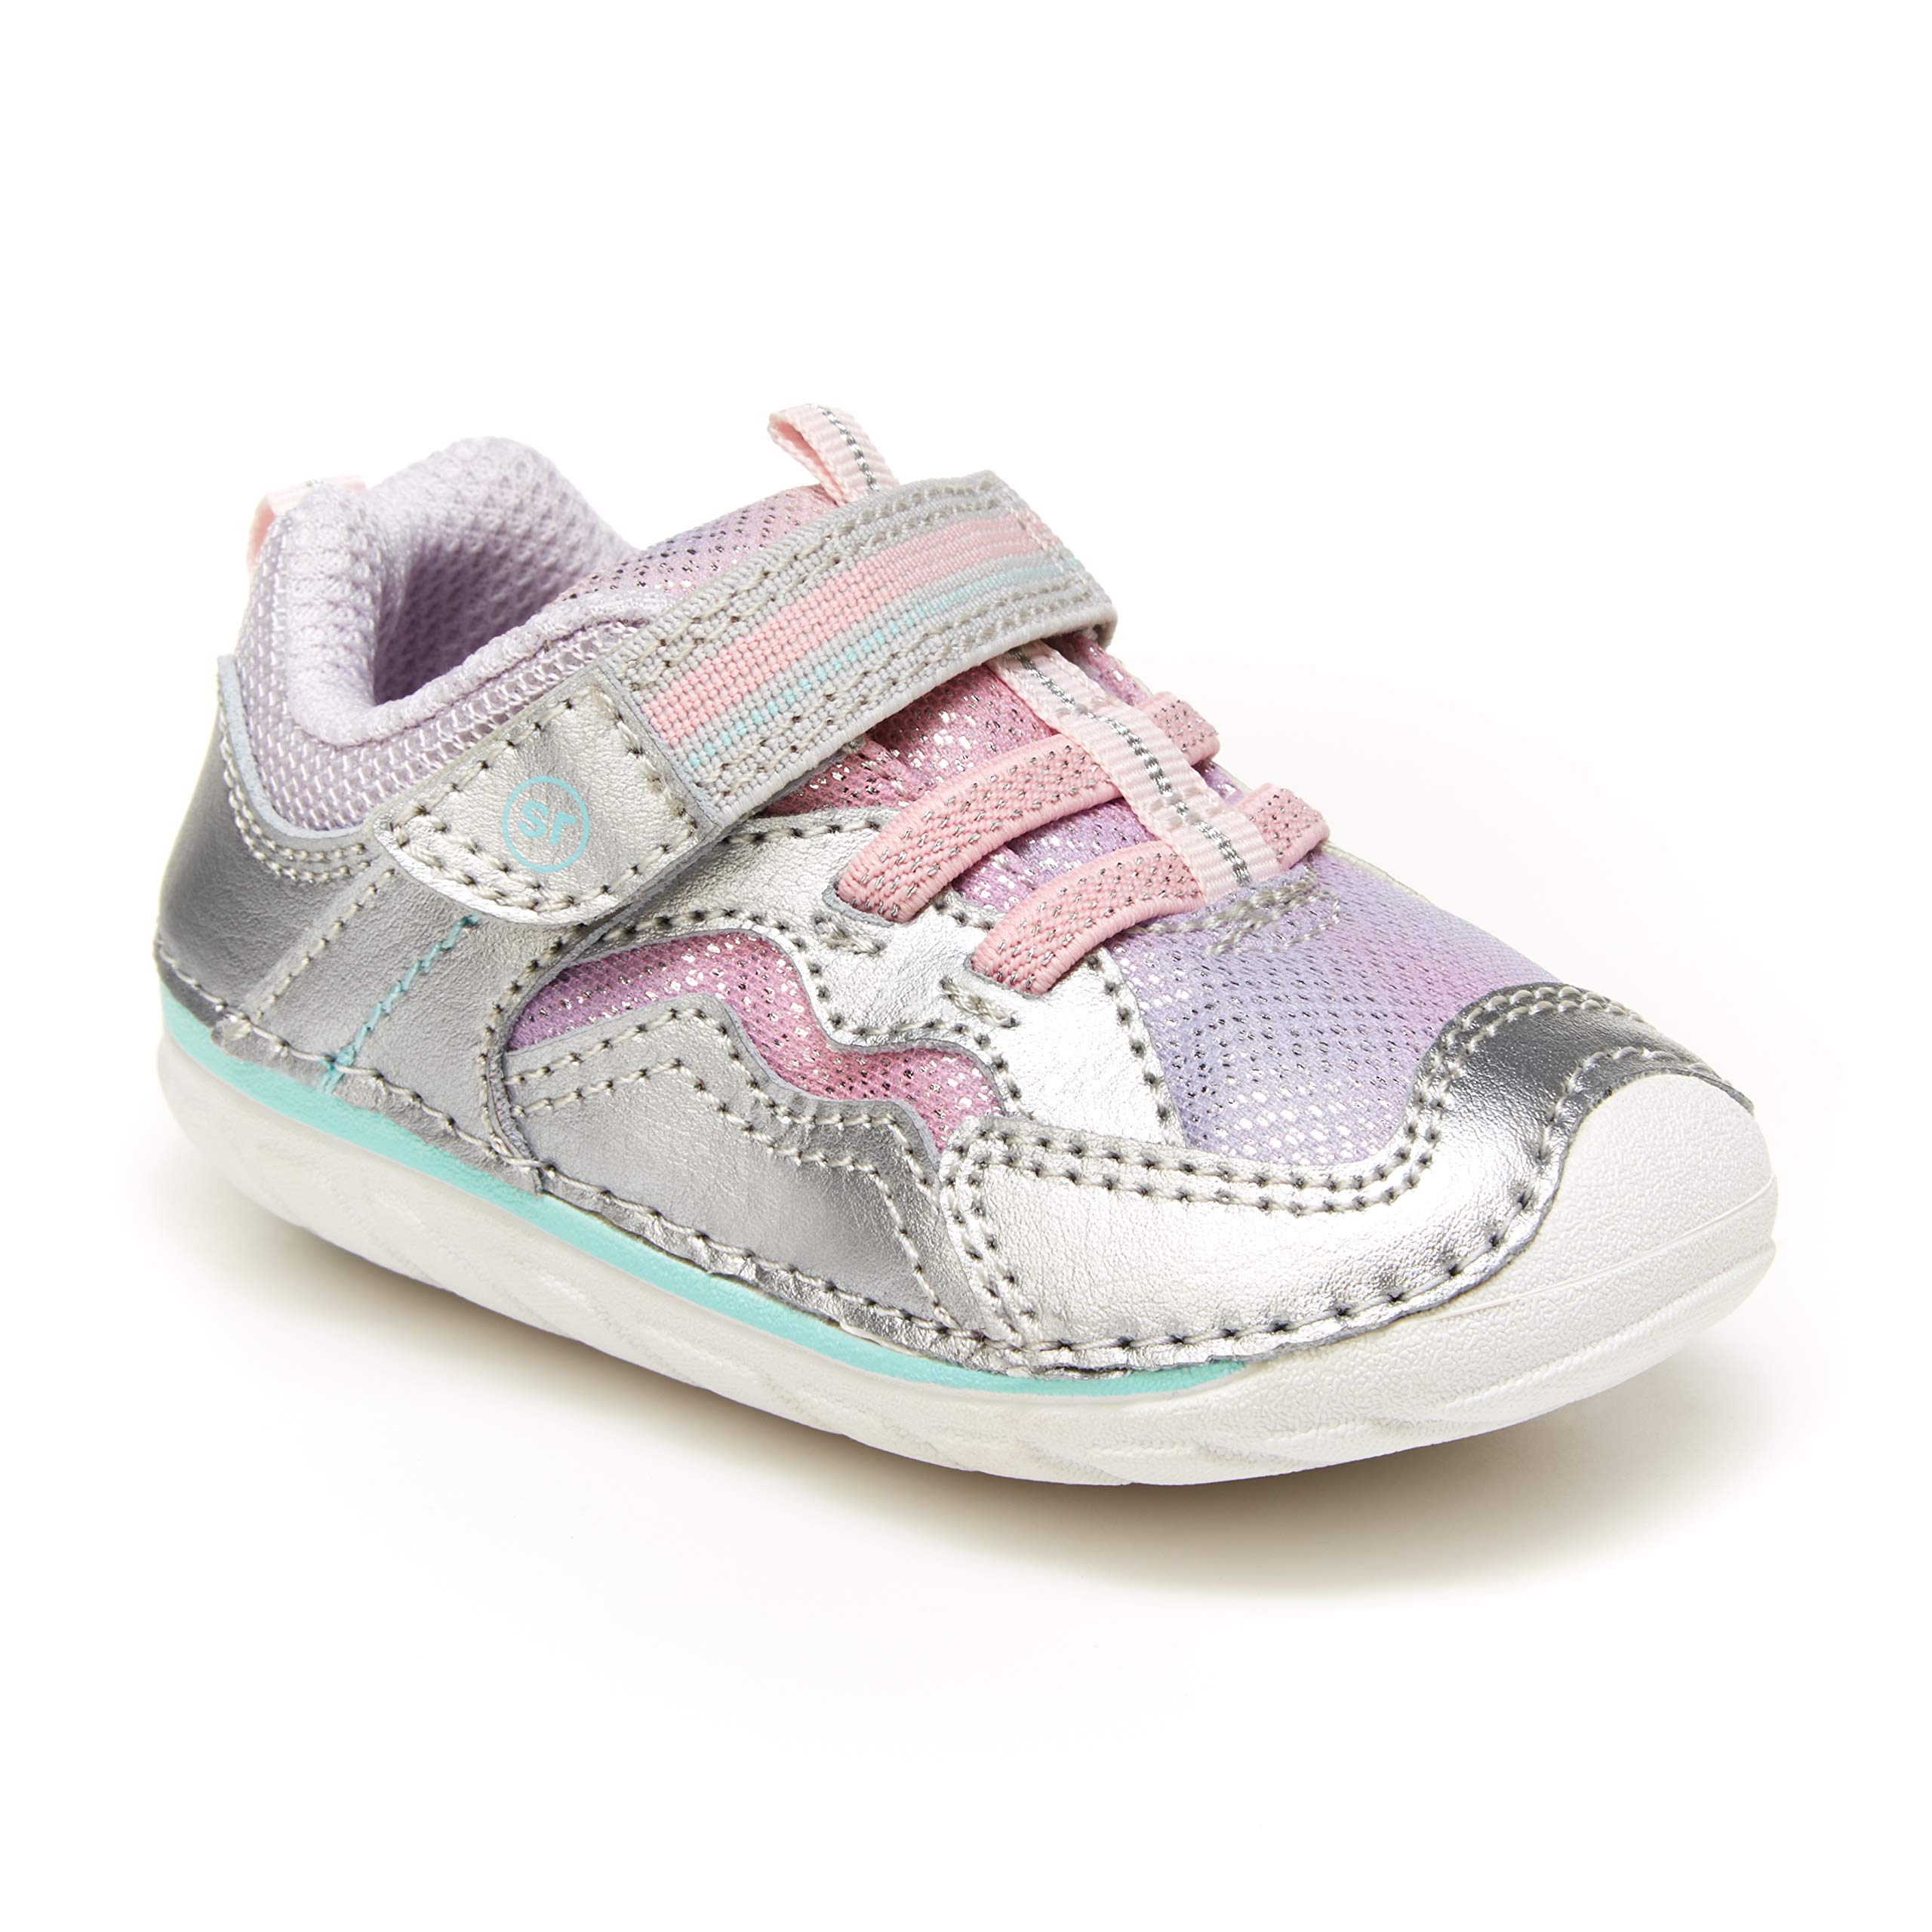 Stride Rite baby girls Soft Motion Kylo Sneaker, Silver/Multi, 4.5 Wide Toddler US